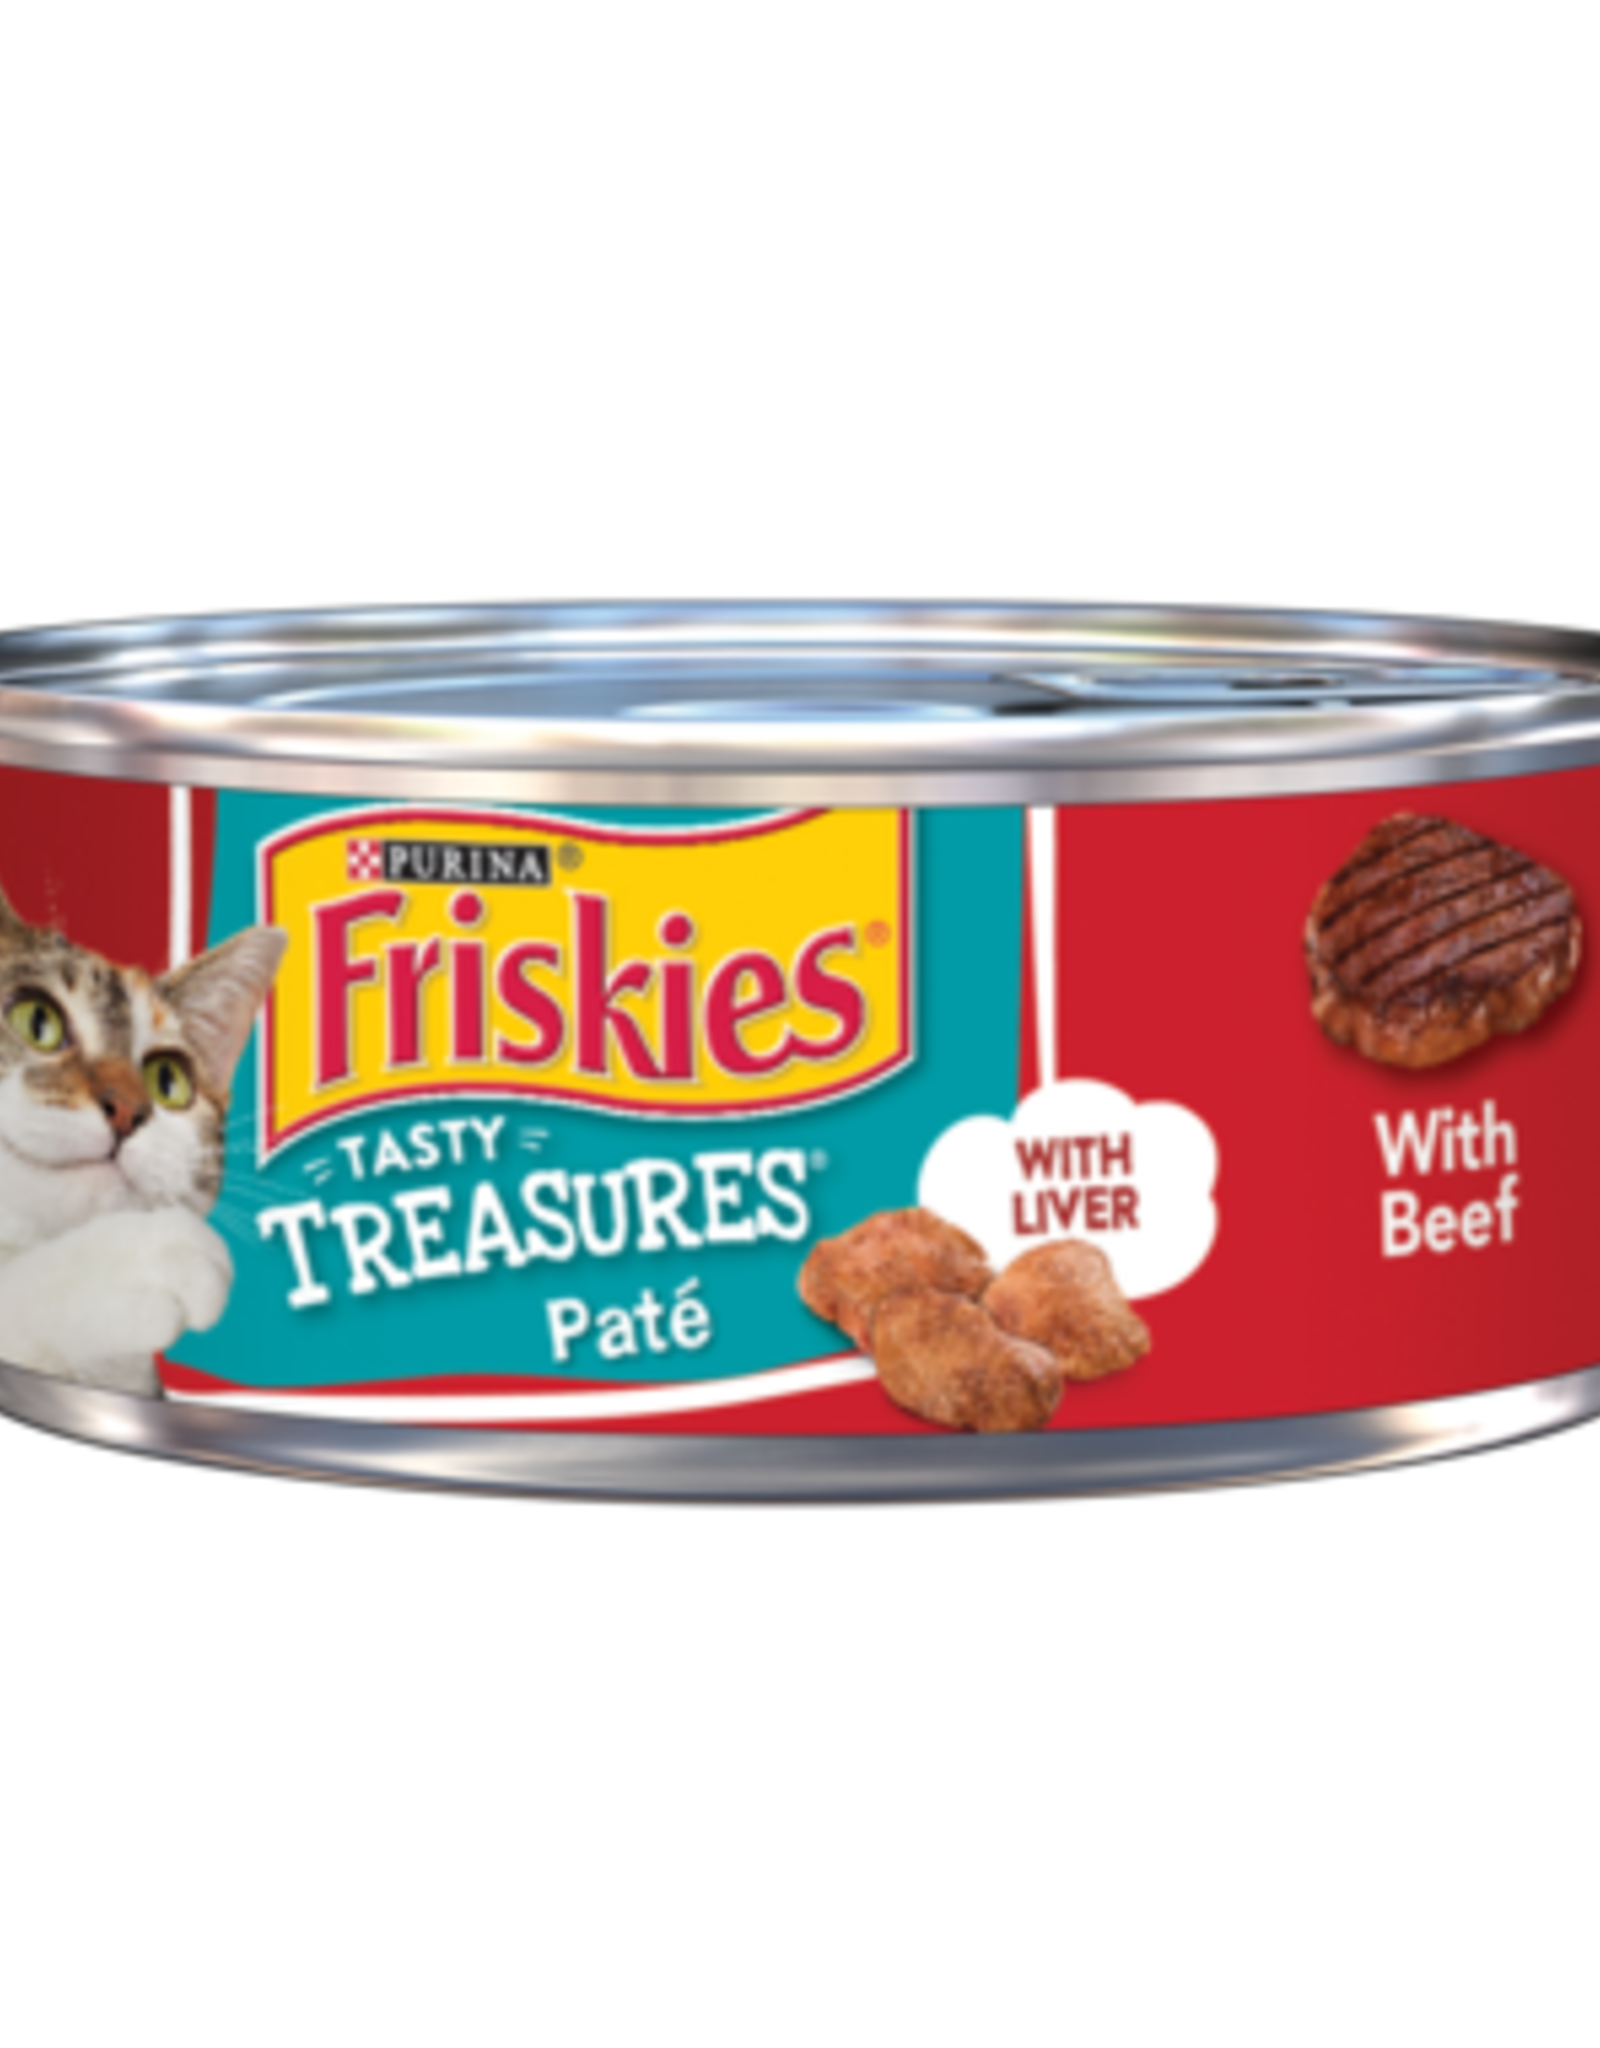 NESTLE PURINA PETCARE FRISKIES CAT TASTY TREASURES BEEF & LIVER W/ CHEESE 5.5OZ CASE OF 24